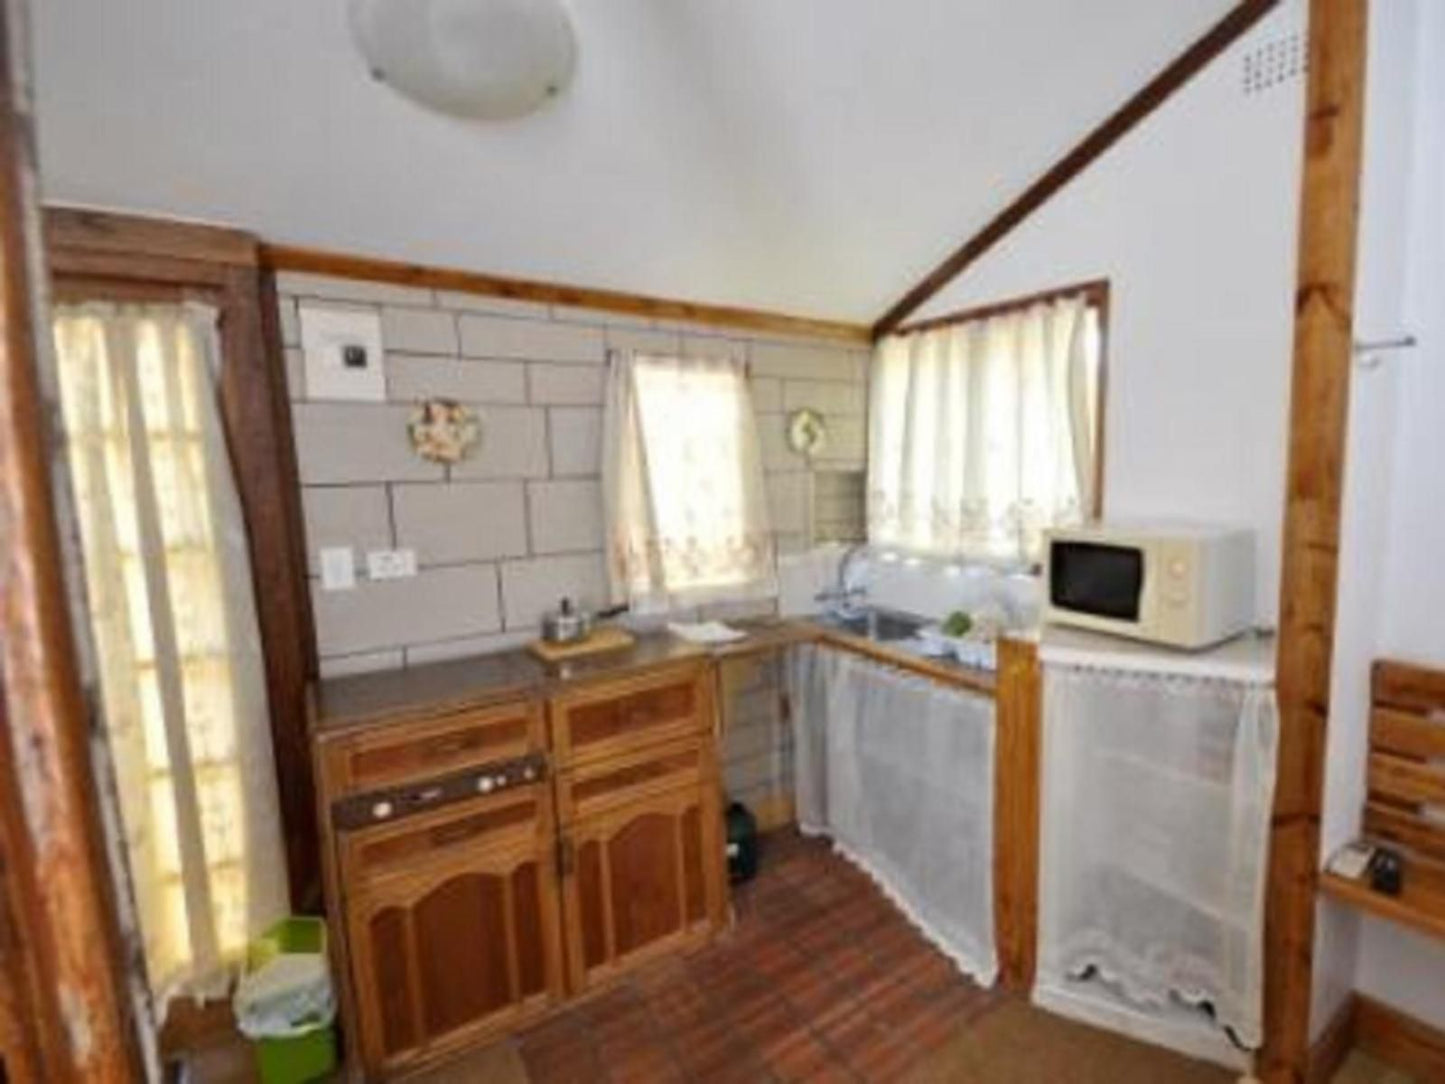 North Lodge Cottages Self Catering Park Hill Durban Kwazulu Natal South Africa Kitchen